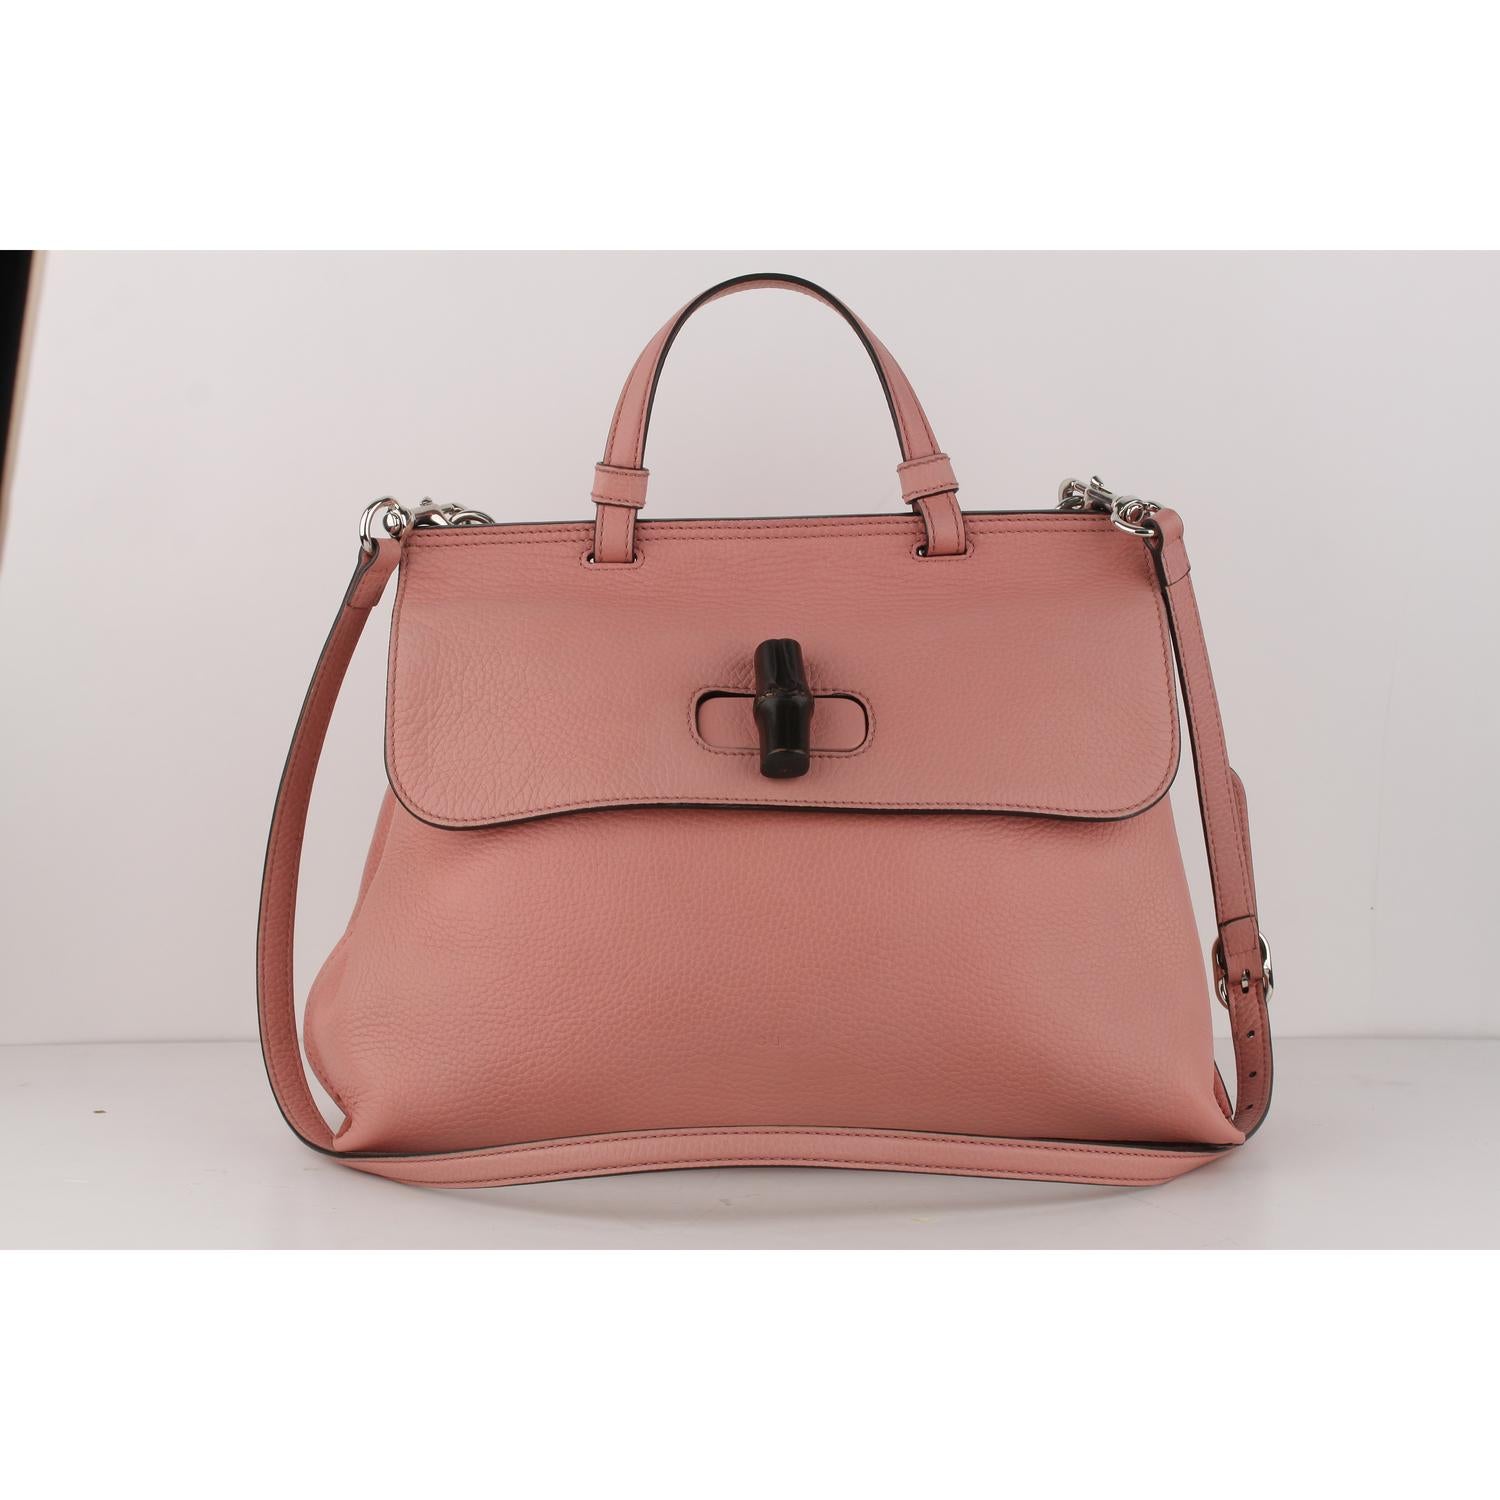 Gucci Pink Leather Daily Bamboo Satchel Top Handle Bag

Material : Leather 
Color : Pink
Model : Daily Bamboo 
Gender : Women
Country of Manufacture : Italy
Size : Medium

Bag Depth : 5 inches - 14 cm 
Bag Height : 9 inches - 22,8 cm 
Bag Length :